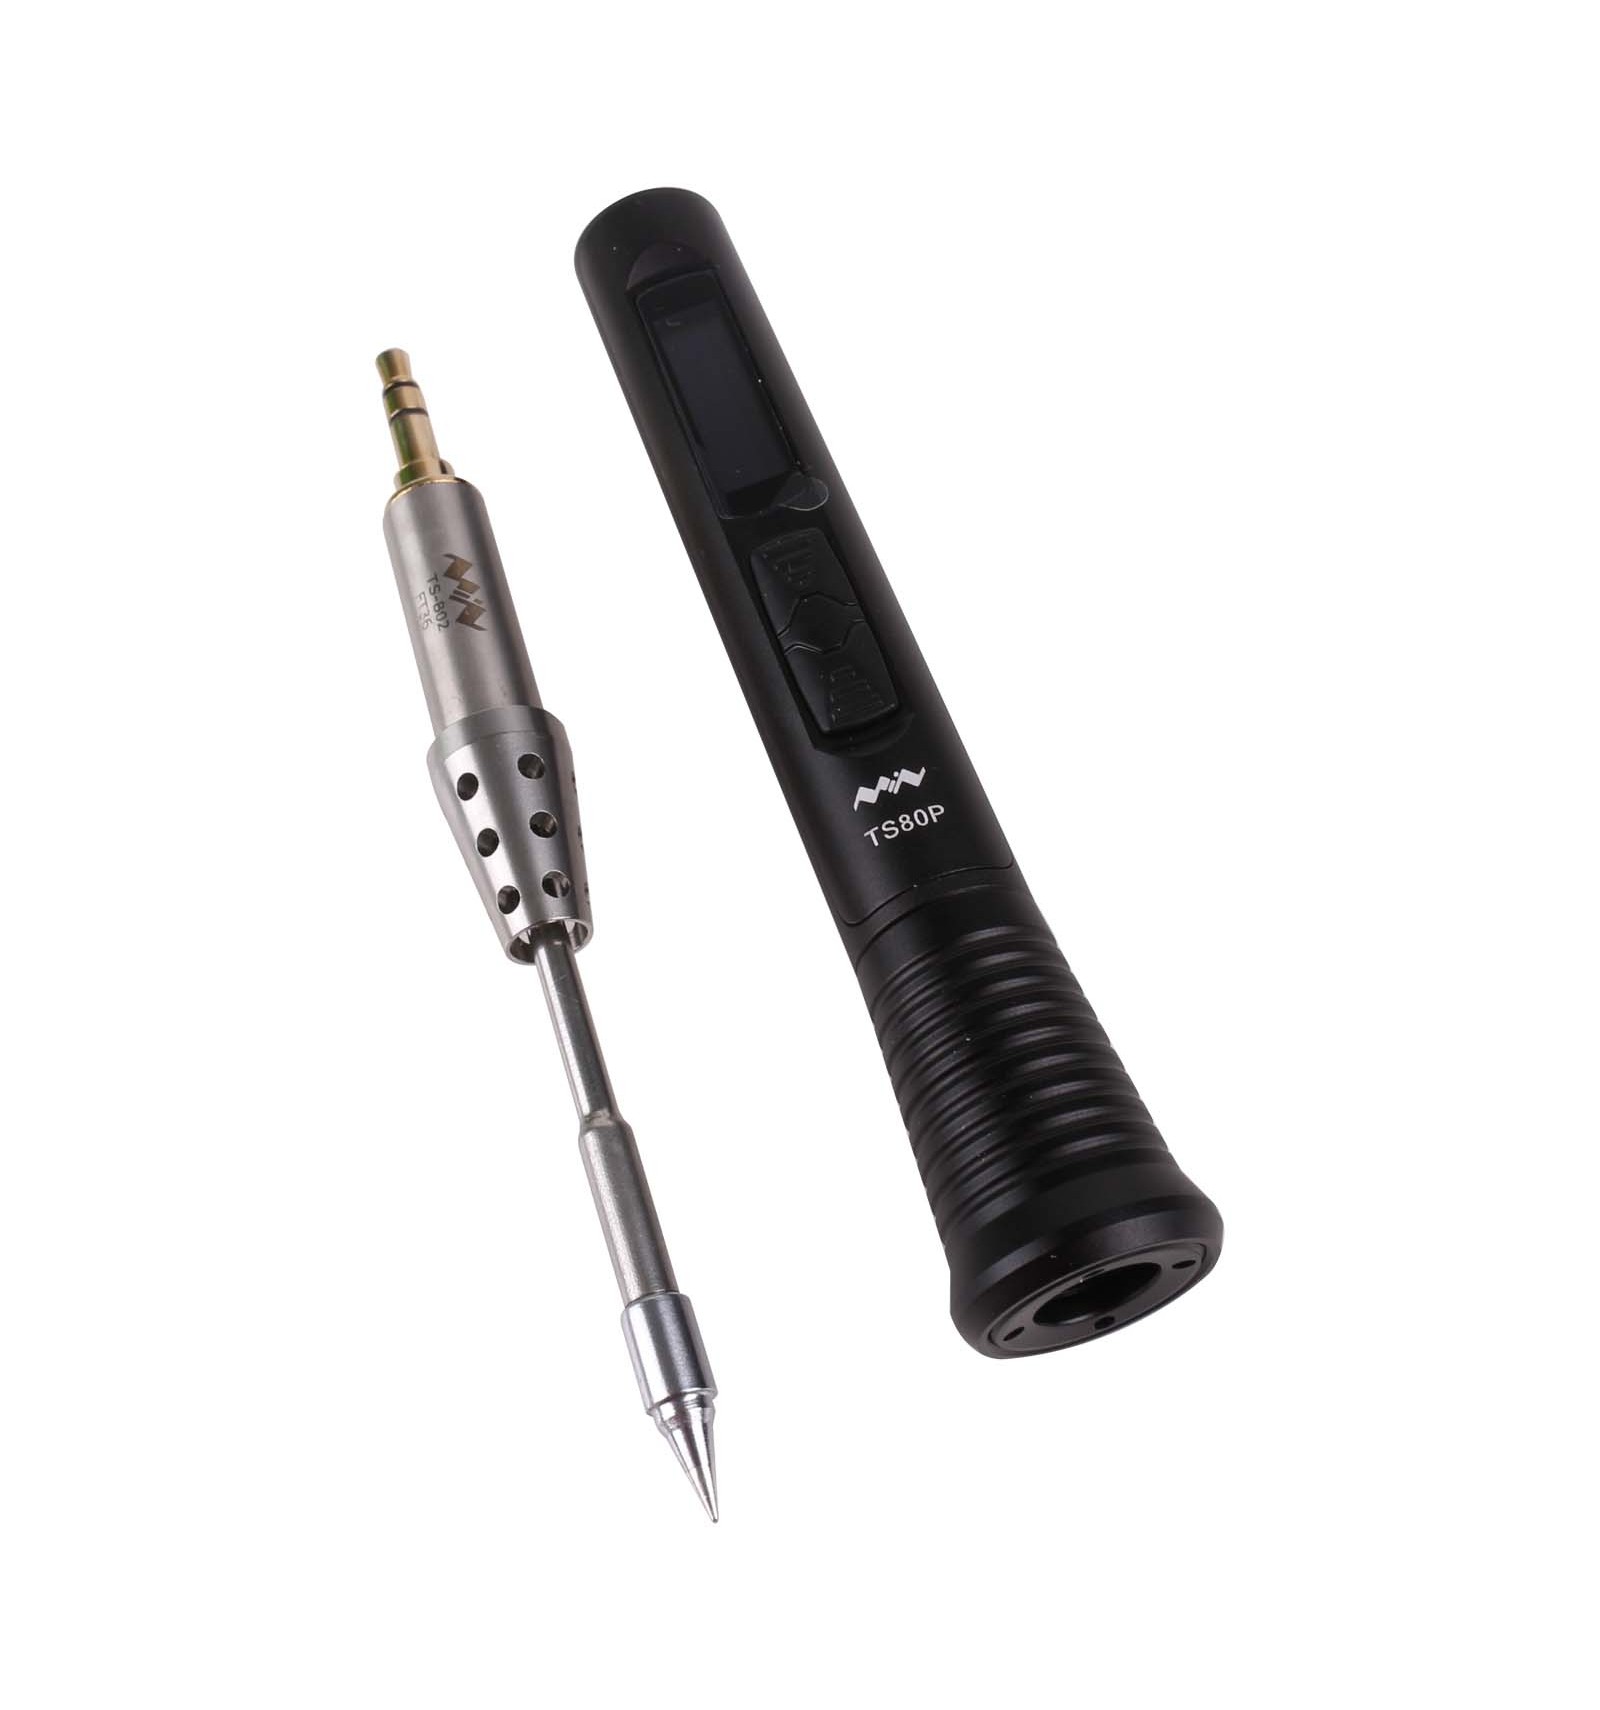 TS80P Smart Soldering Iron | Portable with QC3.0 & PD2.0